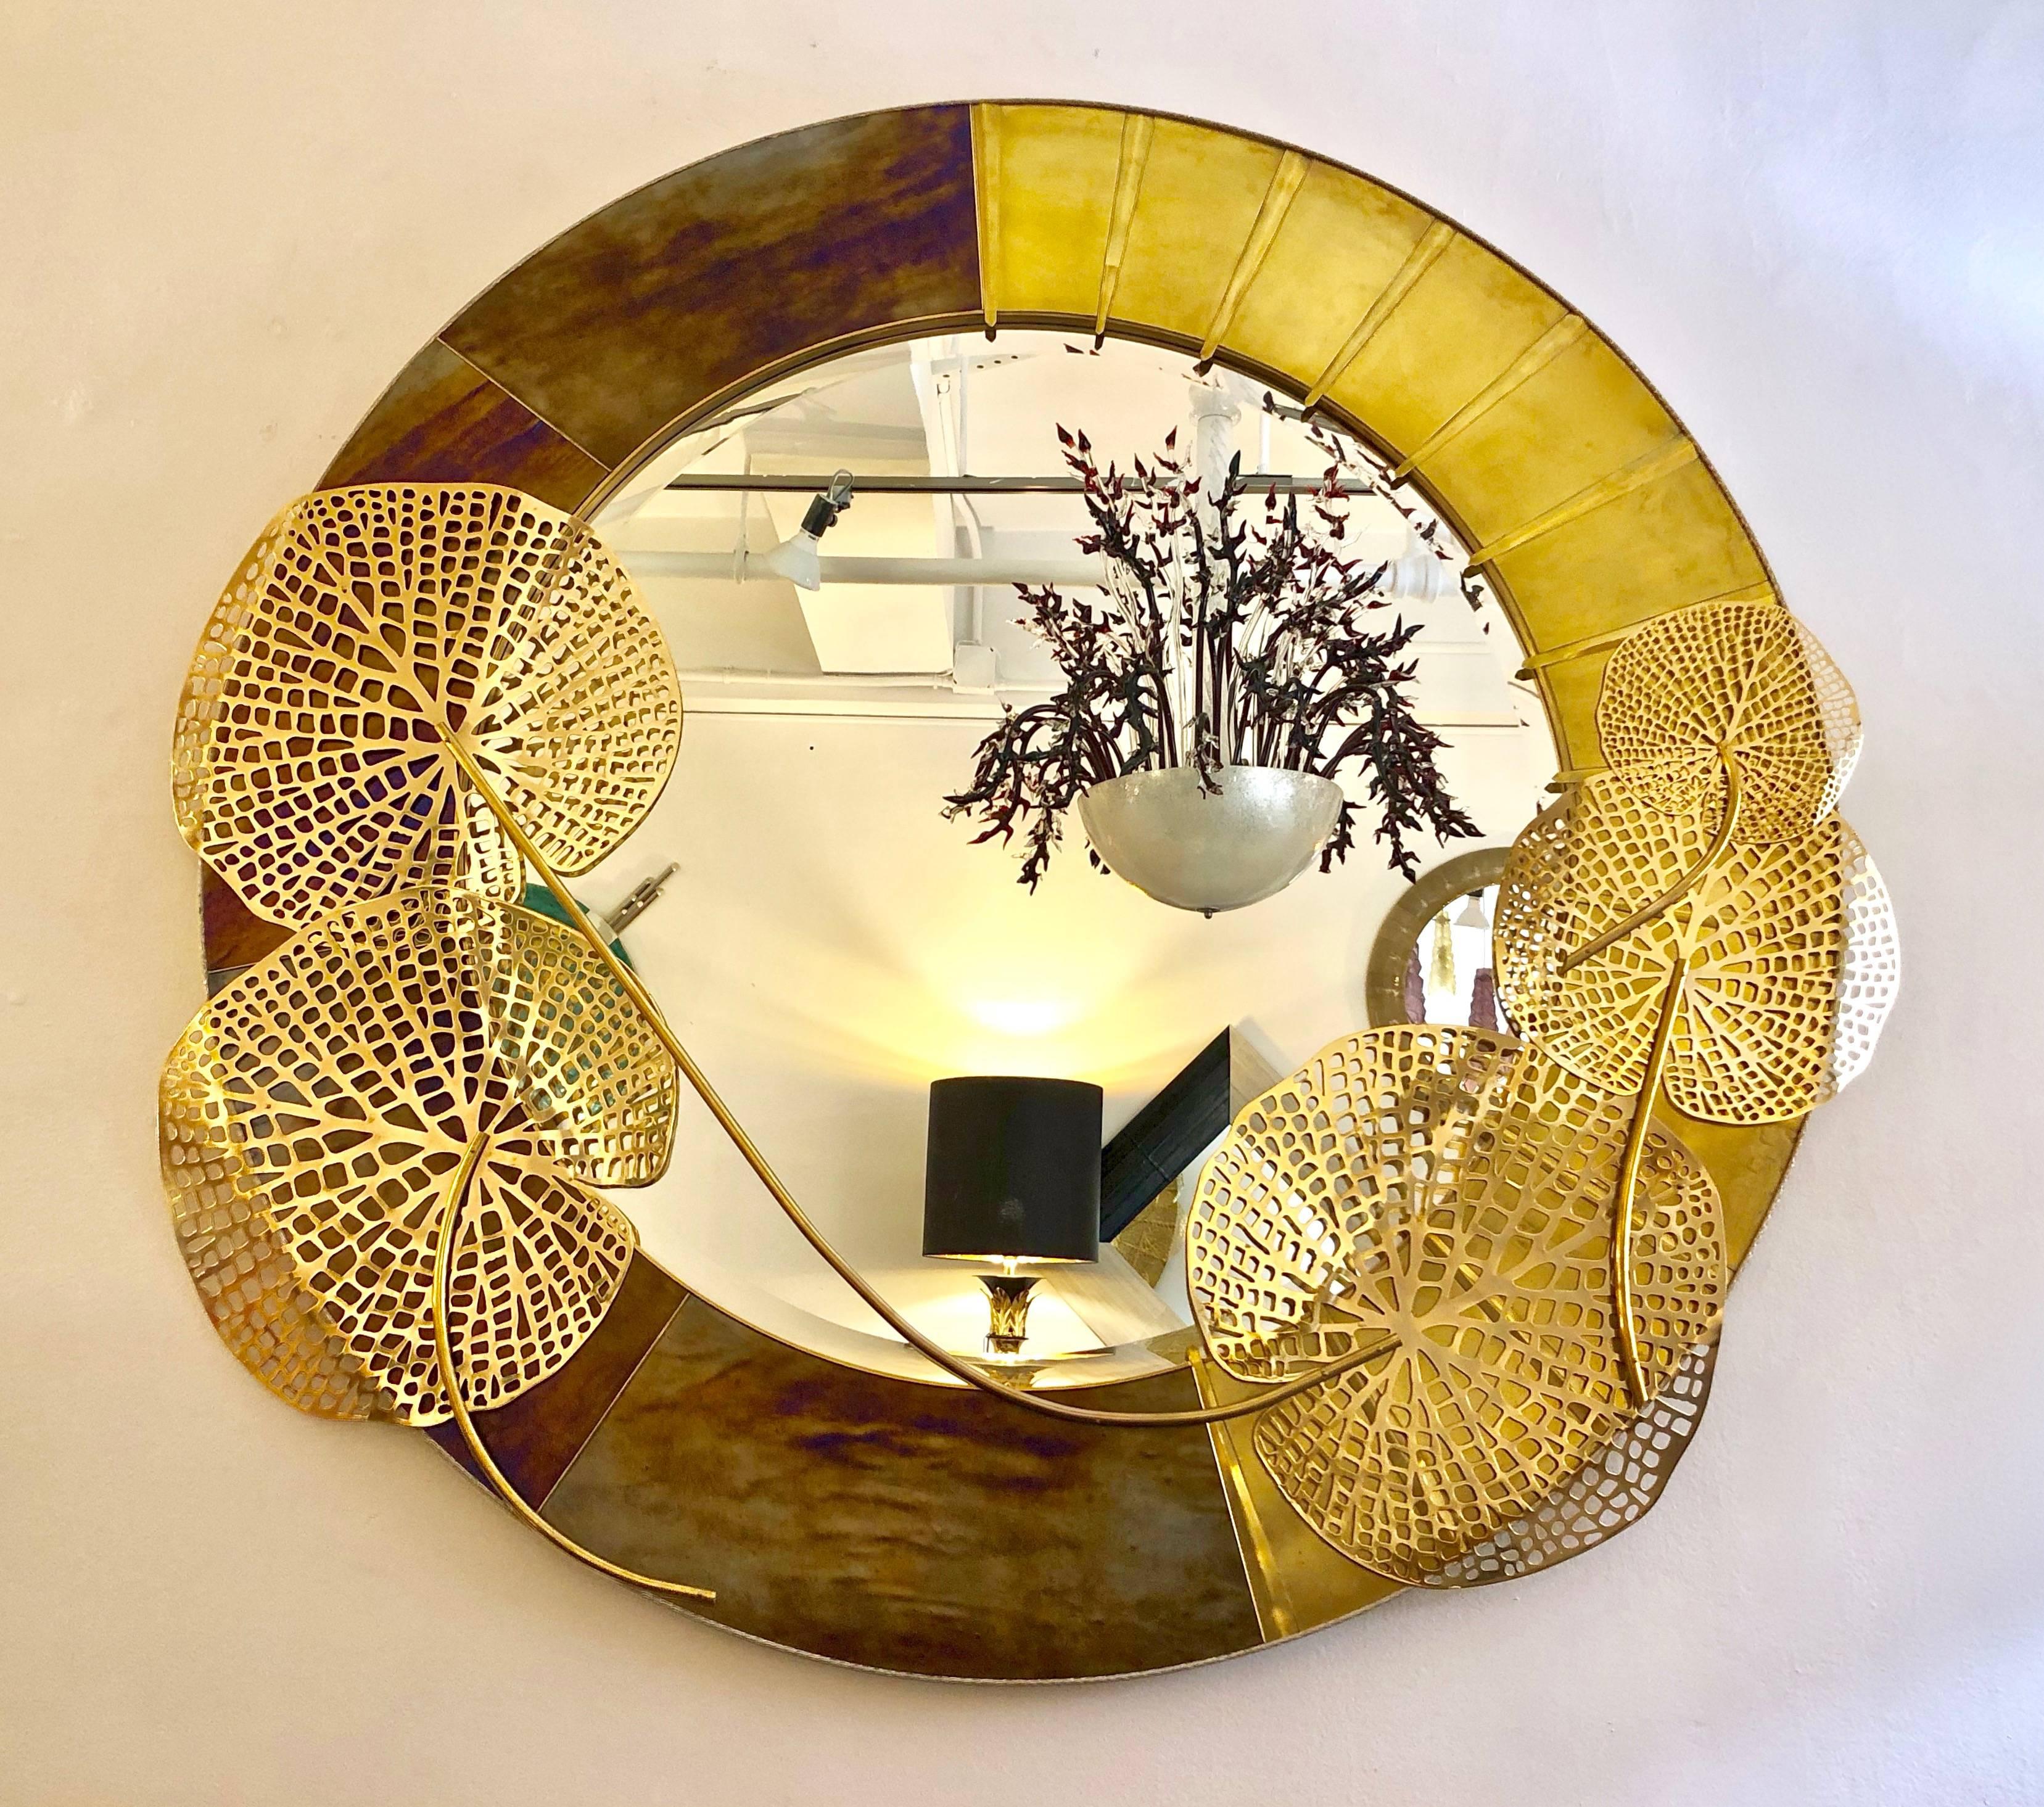 Exclusive Art Deco design by Cosulich Interiors, contemporary Italian fine Design bespoke wall mirror, nature inspired sculpture, entirely handcrafted with a substantial brass frame, finished on one side with an iridescent Murano glass worked